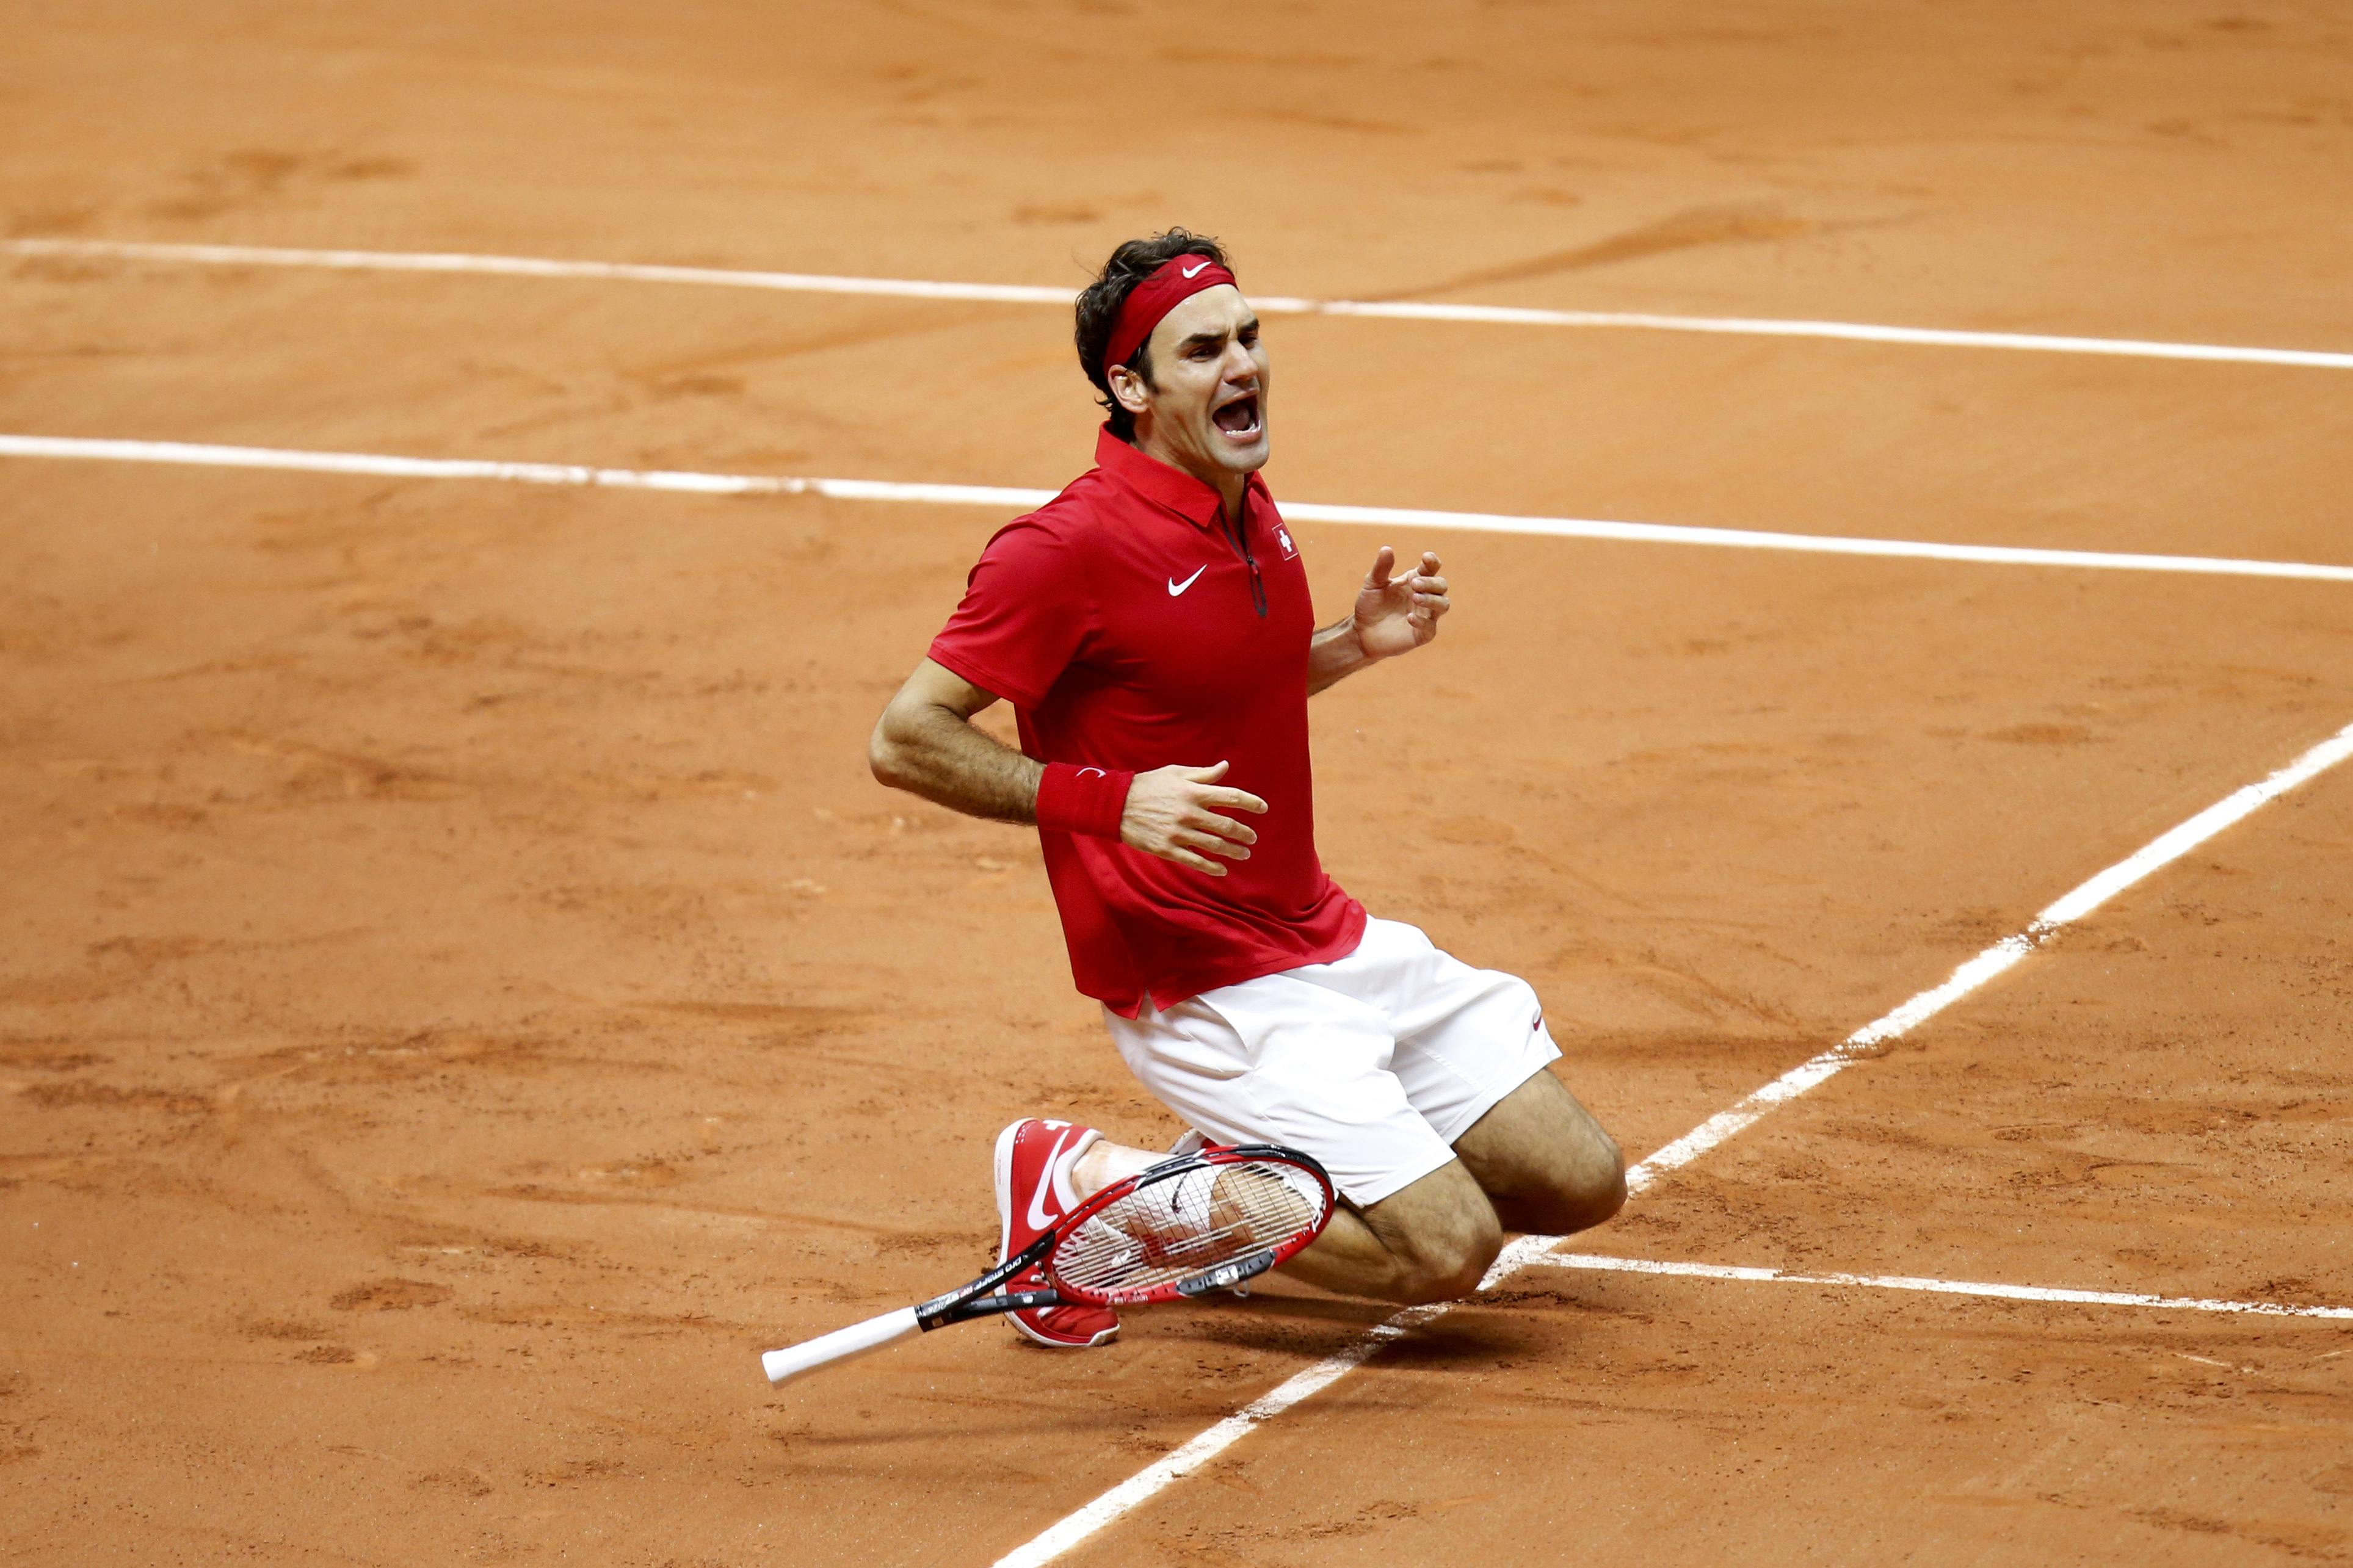 Switzerland's Roger Federer reacts after he defeated France's Richard Gasquet during their Davis Cup final singles tennis match at the Pierre-Mauroy stadium in Villeneuve d'Ascq, near Lille, November 23, 2014. Roger Federer beat Richard Gasquet on Sunday to give Switzerland their first Davis Cup title with a 3-1 victory over hosts France in the final. REUTERS/Charles Platiau (FRANCE - Tags: SPORT TENNIS TPX IMAGES OF THE DAY)